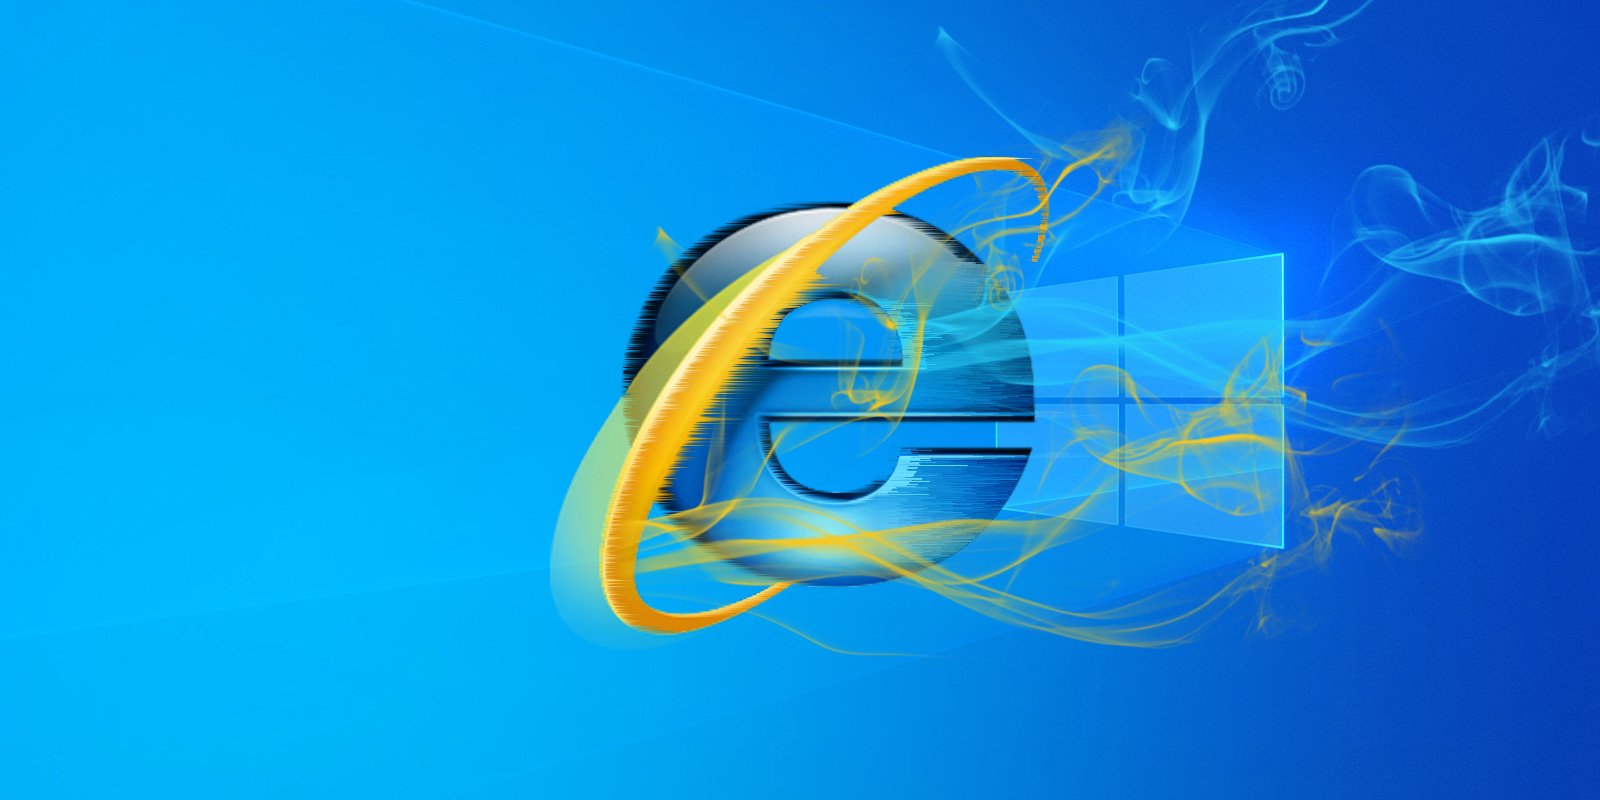 Internet Explorer (almost) breathes its final byte on Wednesday